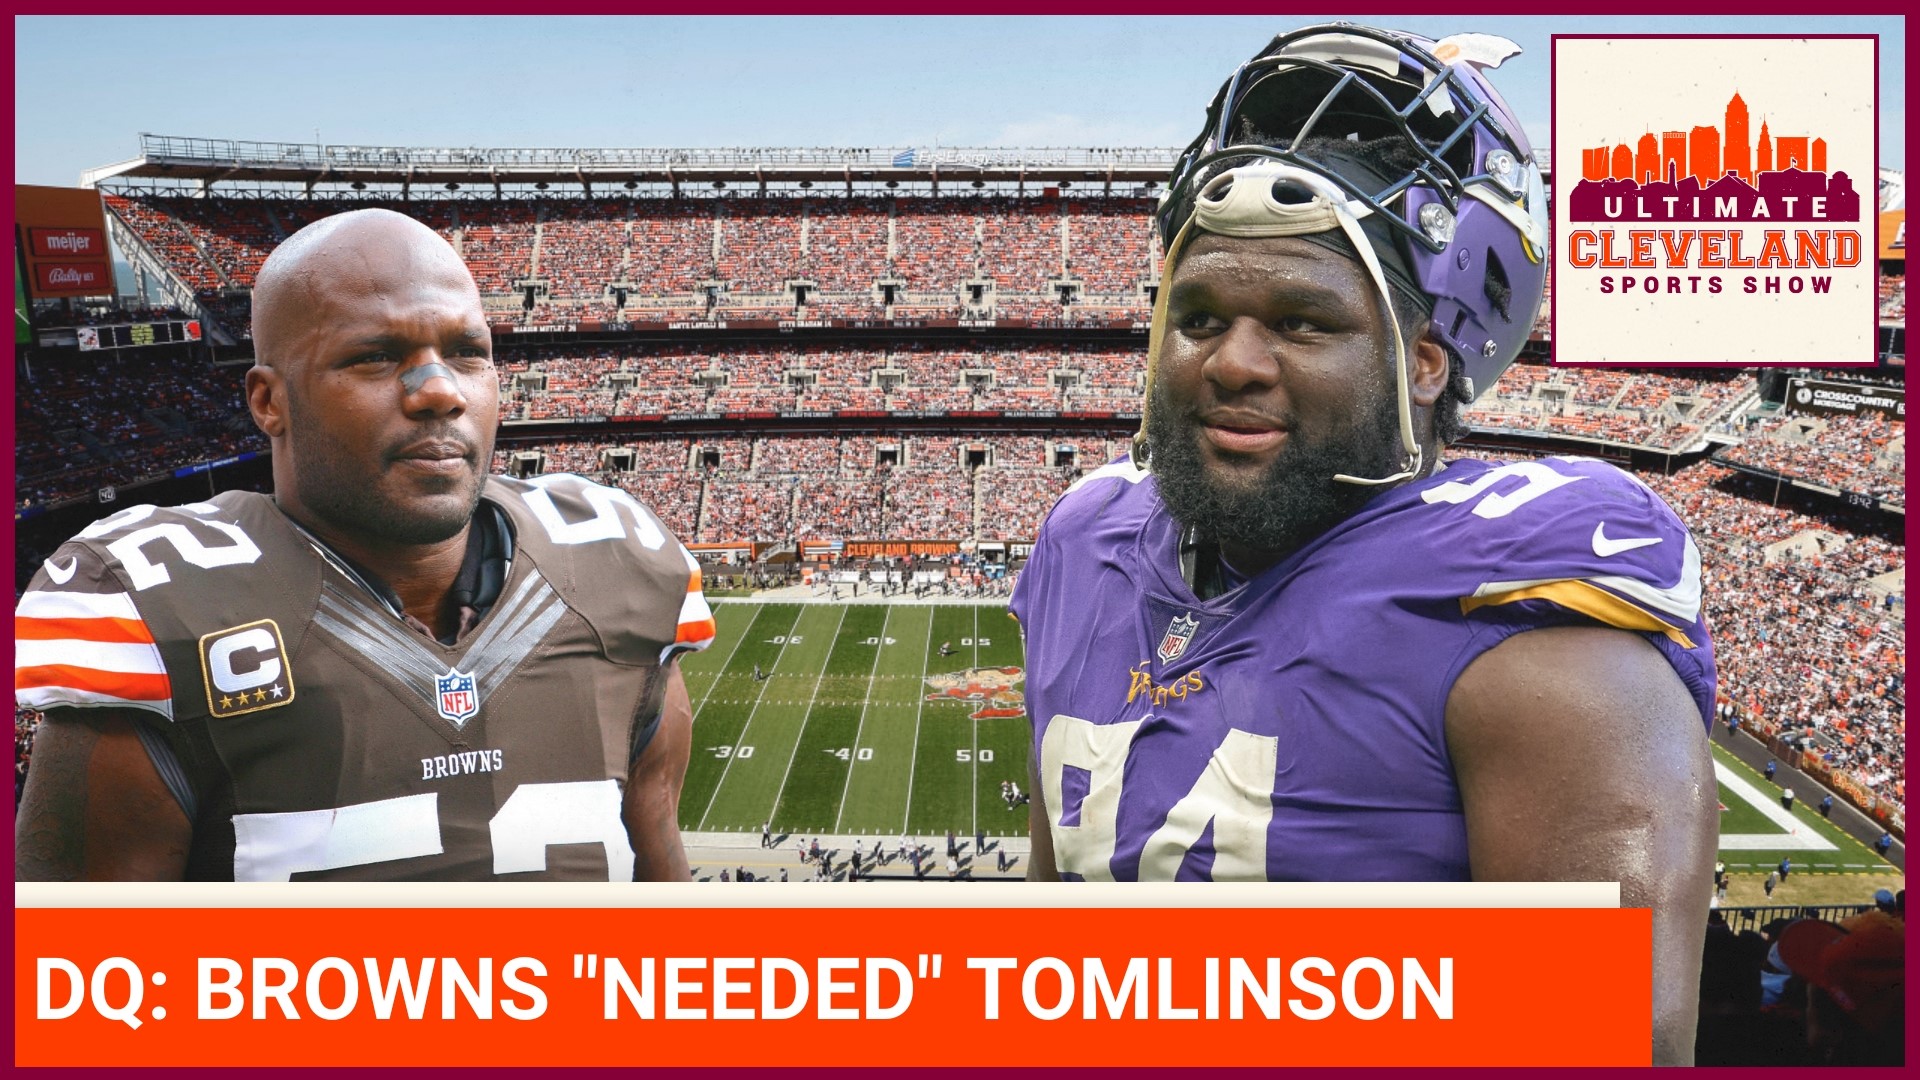 Browns' veteran LB D'Qwell Jackson joins UCSS for PT. 2 of the free agency bracket game